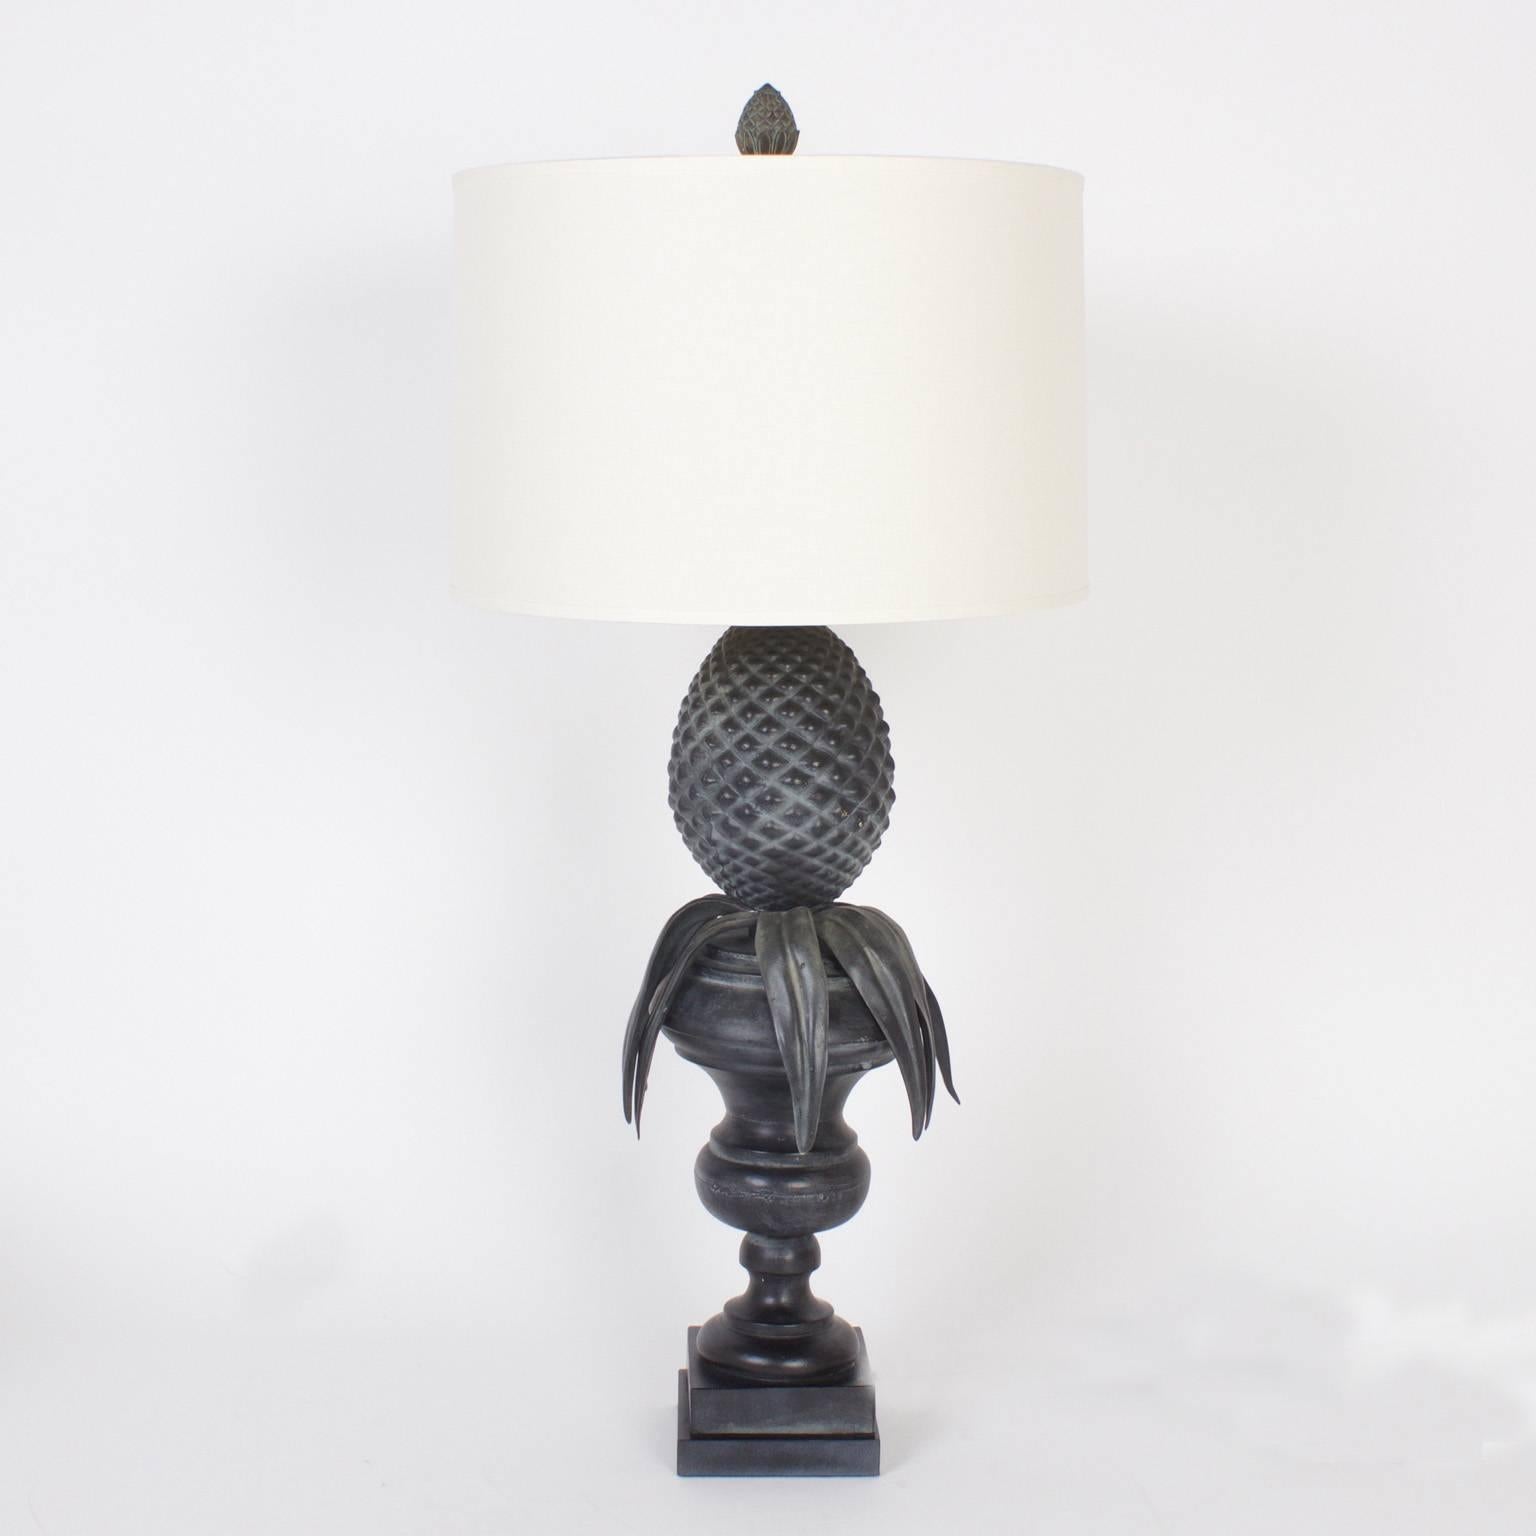 Long a symbol of hospitality, the pineapple has been used in the decorative arts in many forms. These chic modern composition table lamps have a faux aged lead patina that brings this classical idea to the Mid-Century with aplomb.